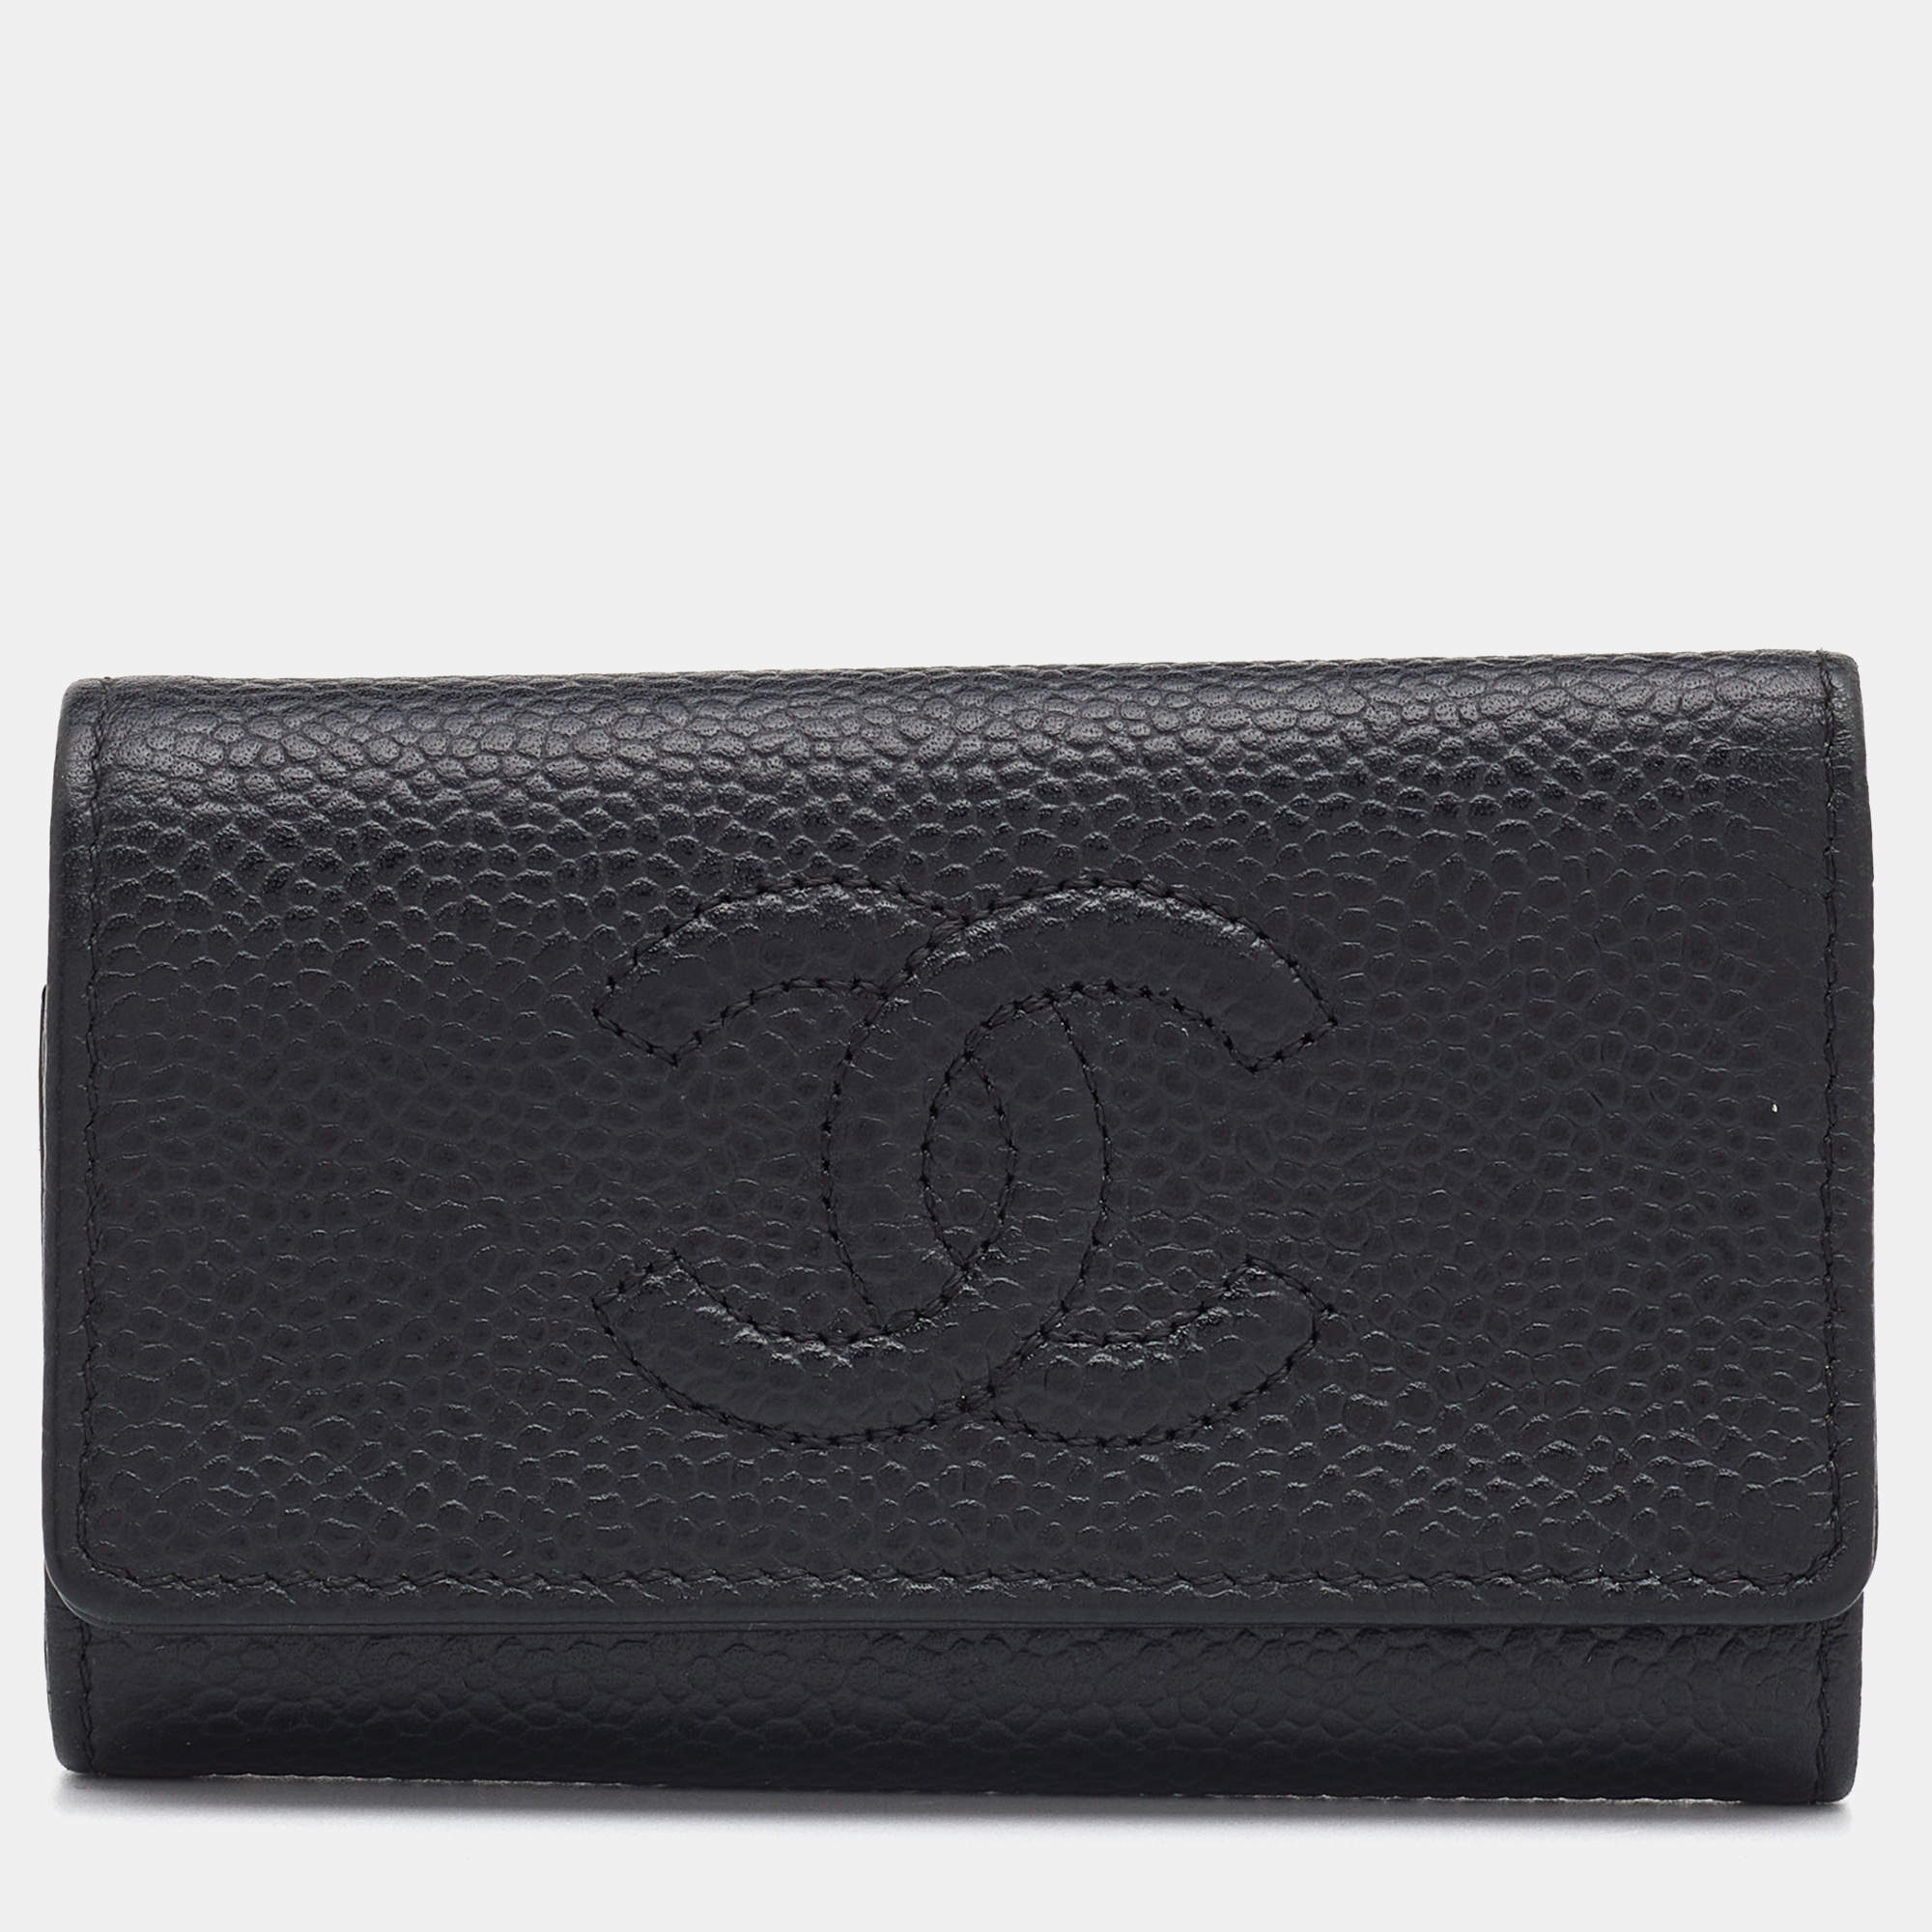 CHANEL Lambskin Quilted 6 Key Holder Black 1267928